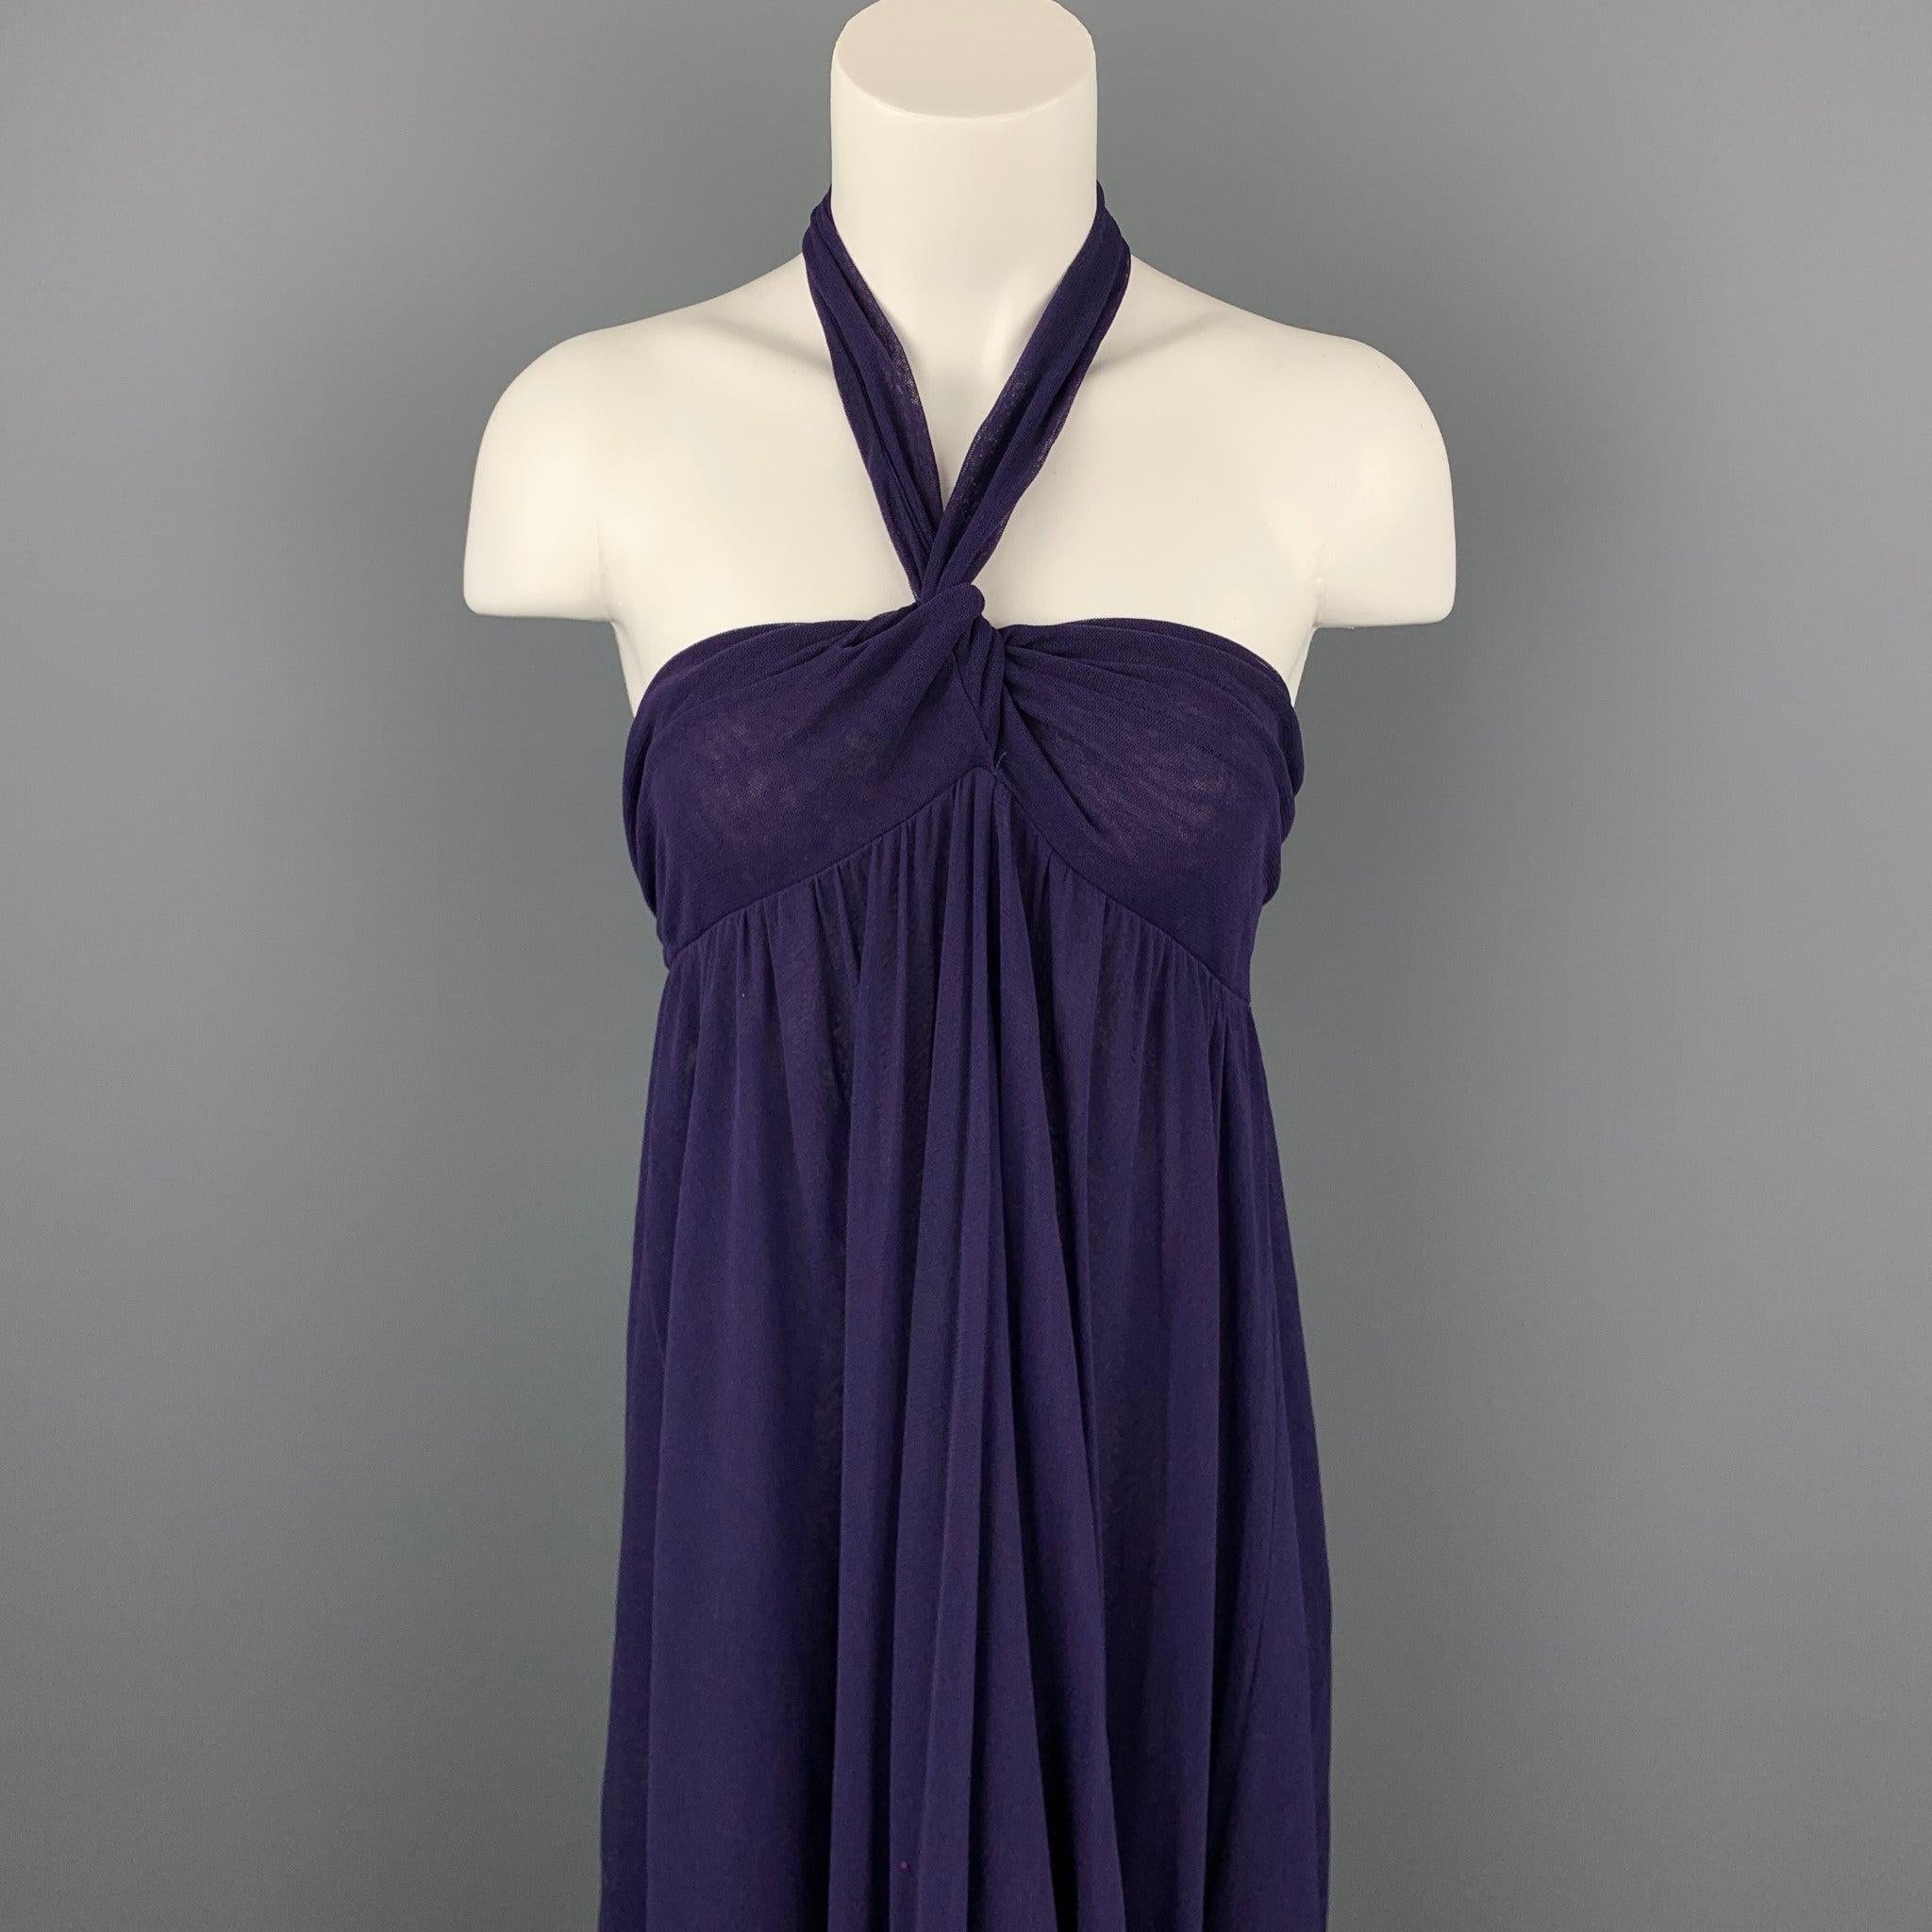 JEAN PAUL GAULTIER cocktail dress comes in a eggplant purple tulle polyamide featuring a halter style, sleeveless, full skirt, and a ruffled hem. Made in Italy.Good
Pre-Owned Condition. 

Marked:  M 

Measurements: 
 Bust: 30 inches Hip: 40 inches